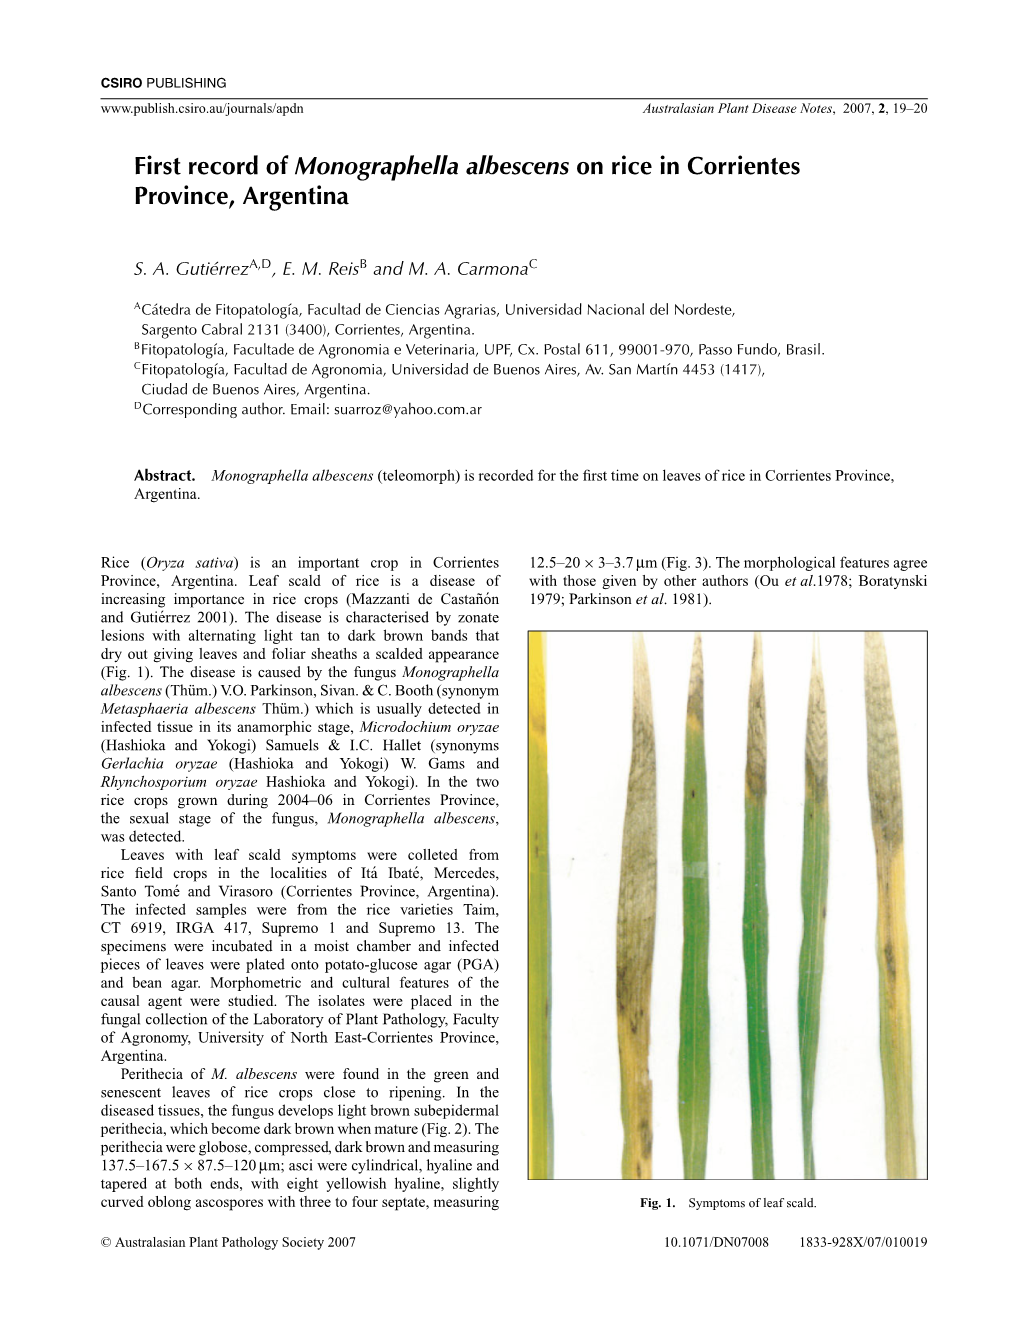 First Record of Monographella Albescens on Rice in Corrientes Province, Argentina